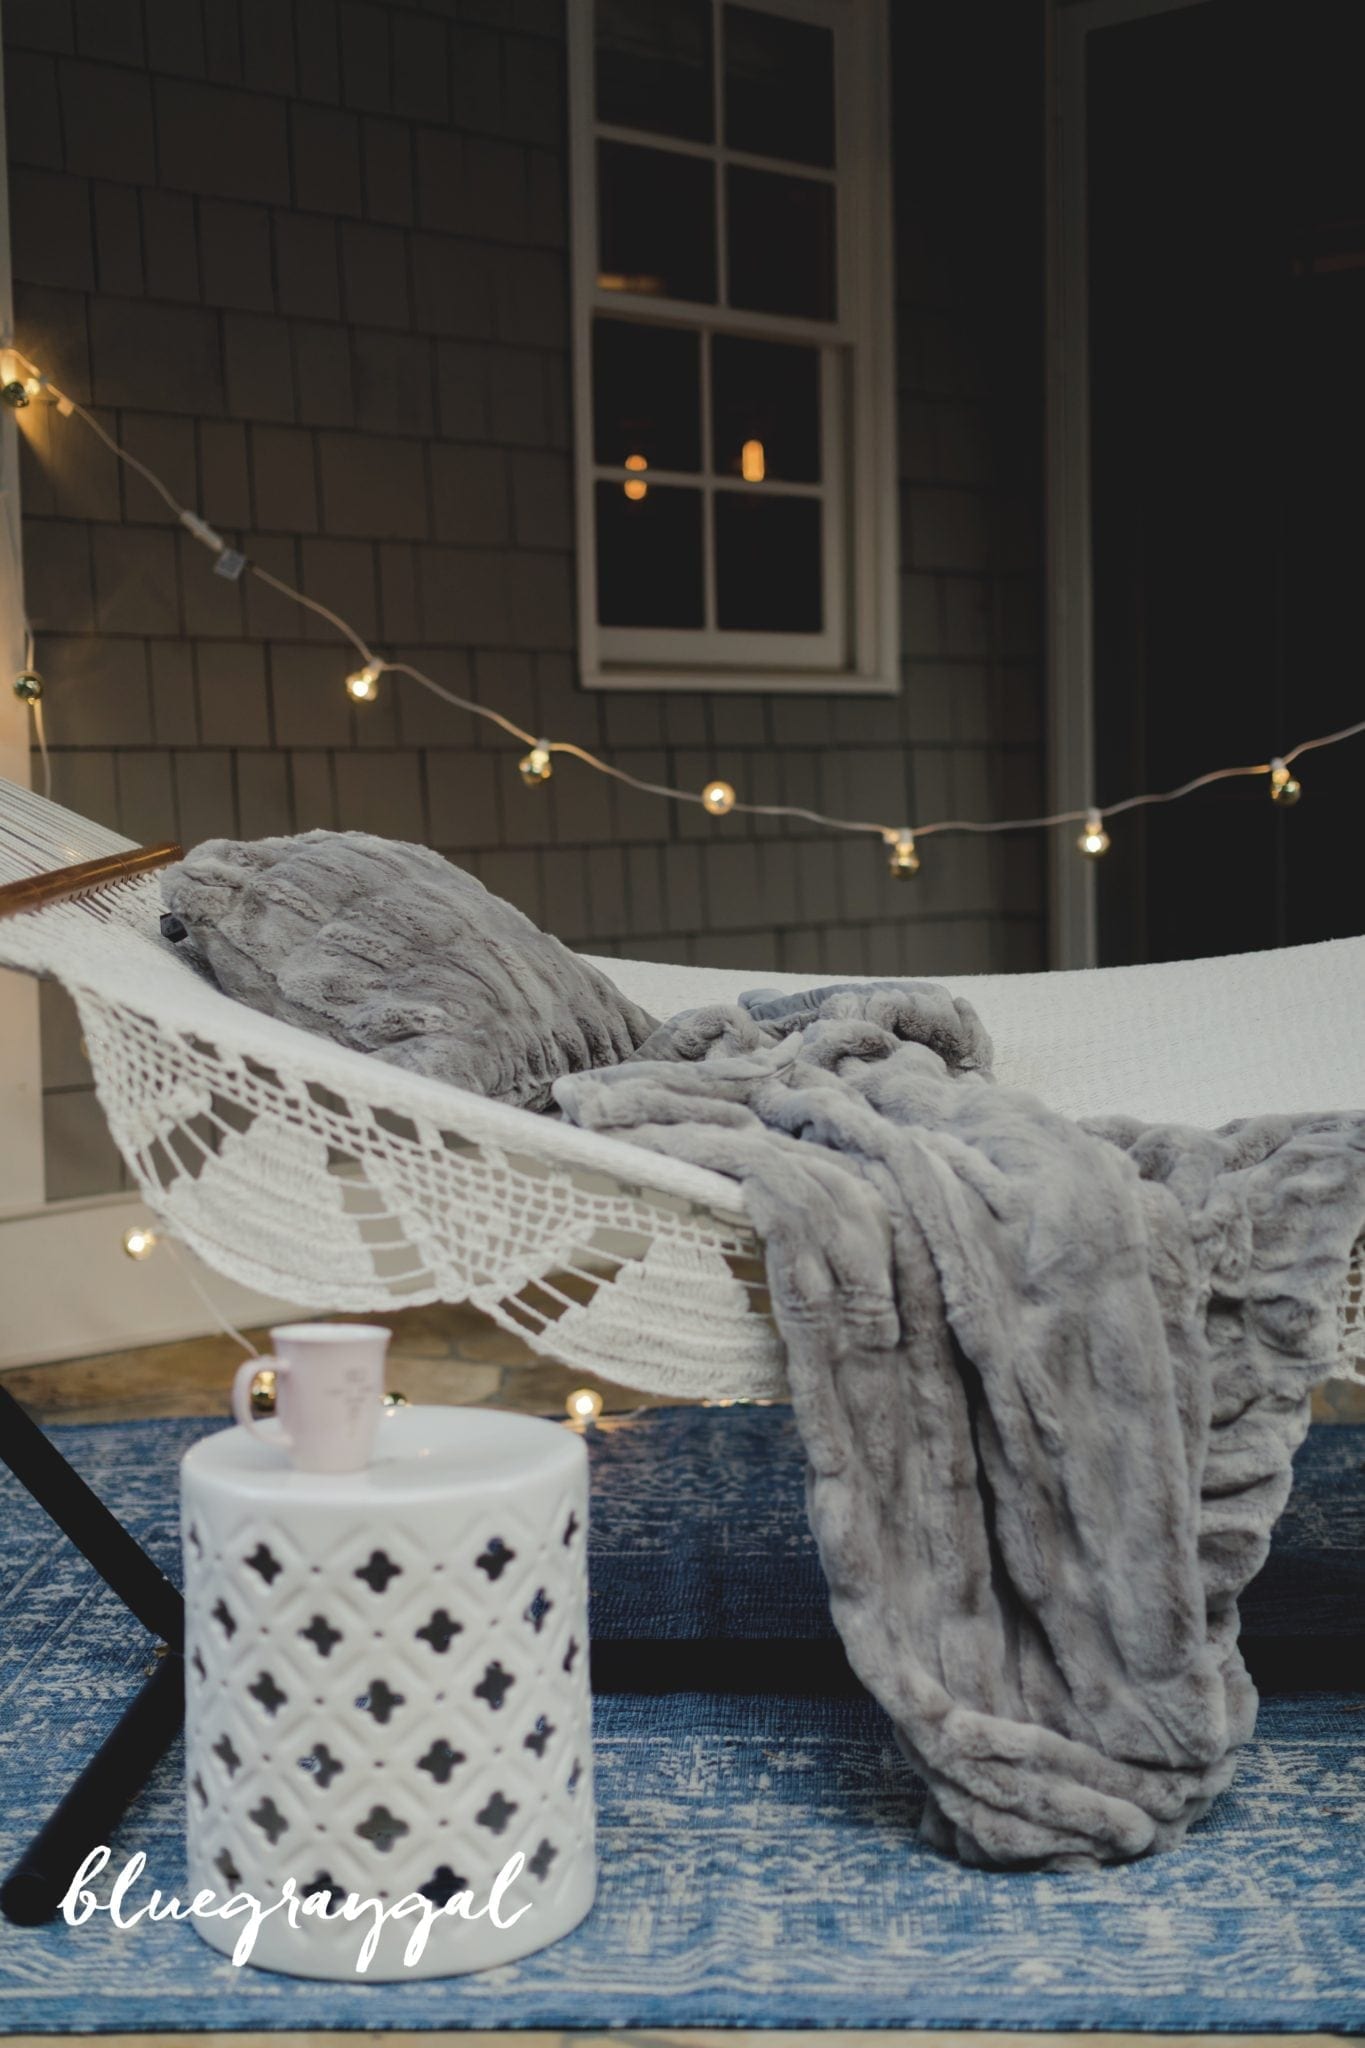 winter hammock hanging outside with white garden stool and winter lights and faur fur gray blanket